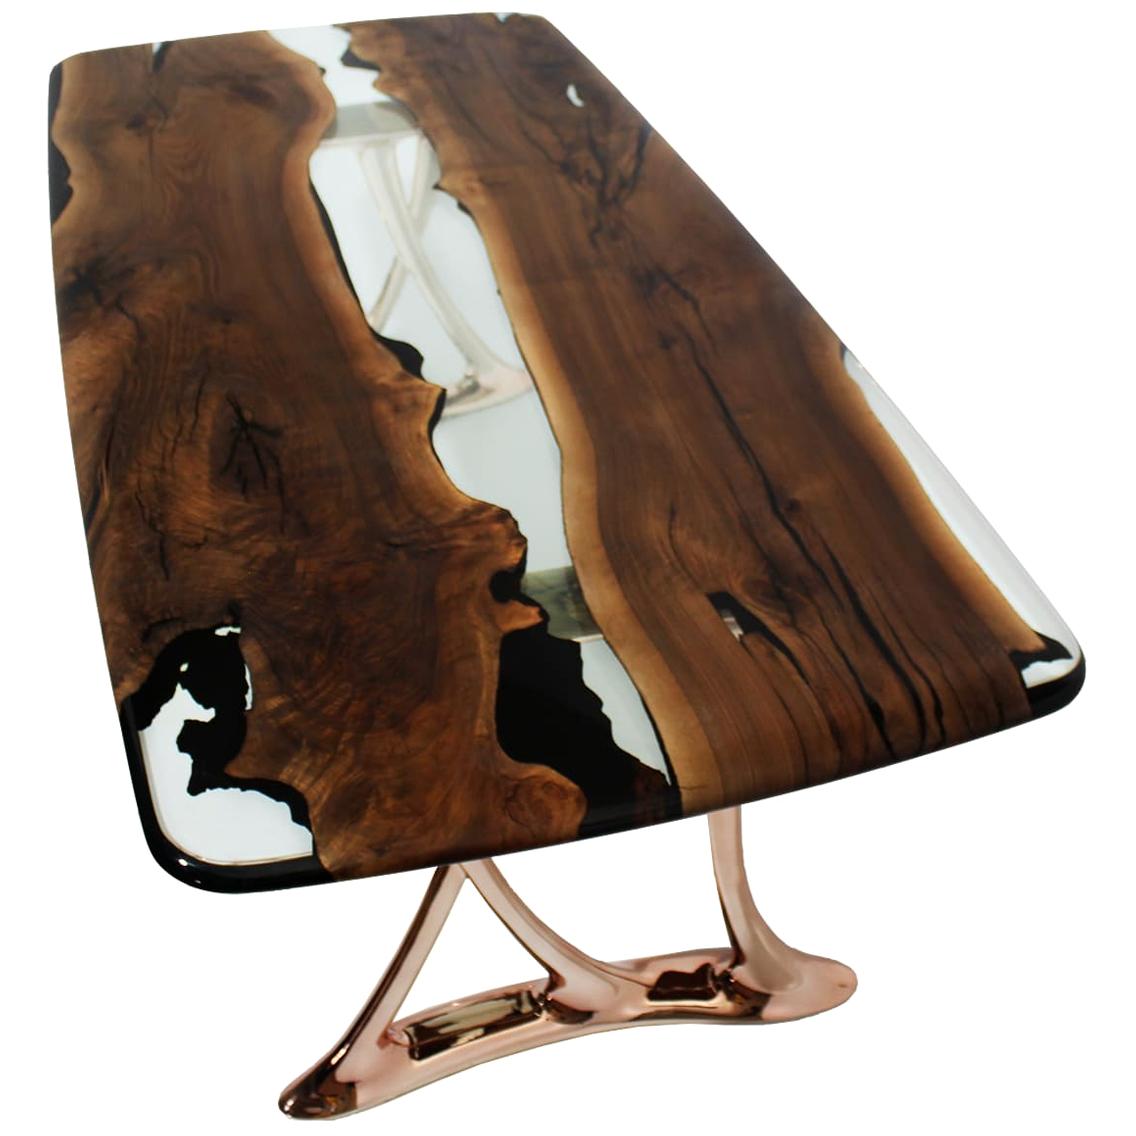 Urbane Epoxy Resin Dining Table with Sand Casted Aluminum Rose Gold Base For Sale